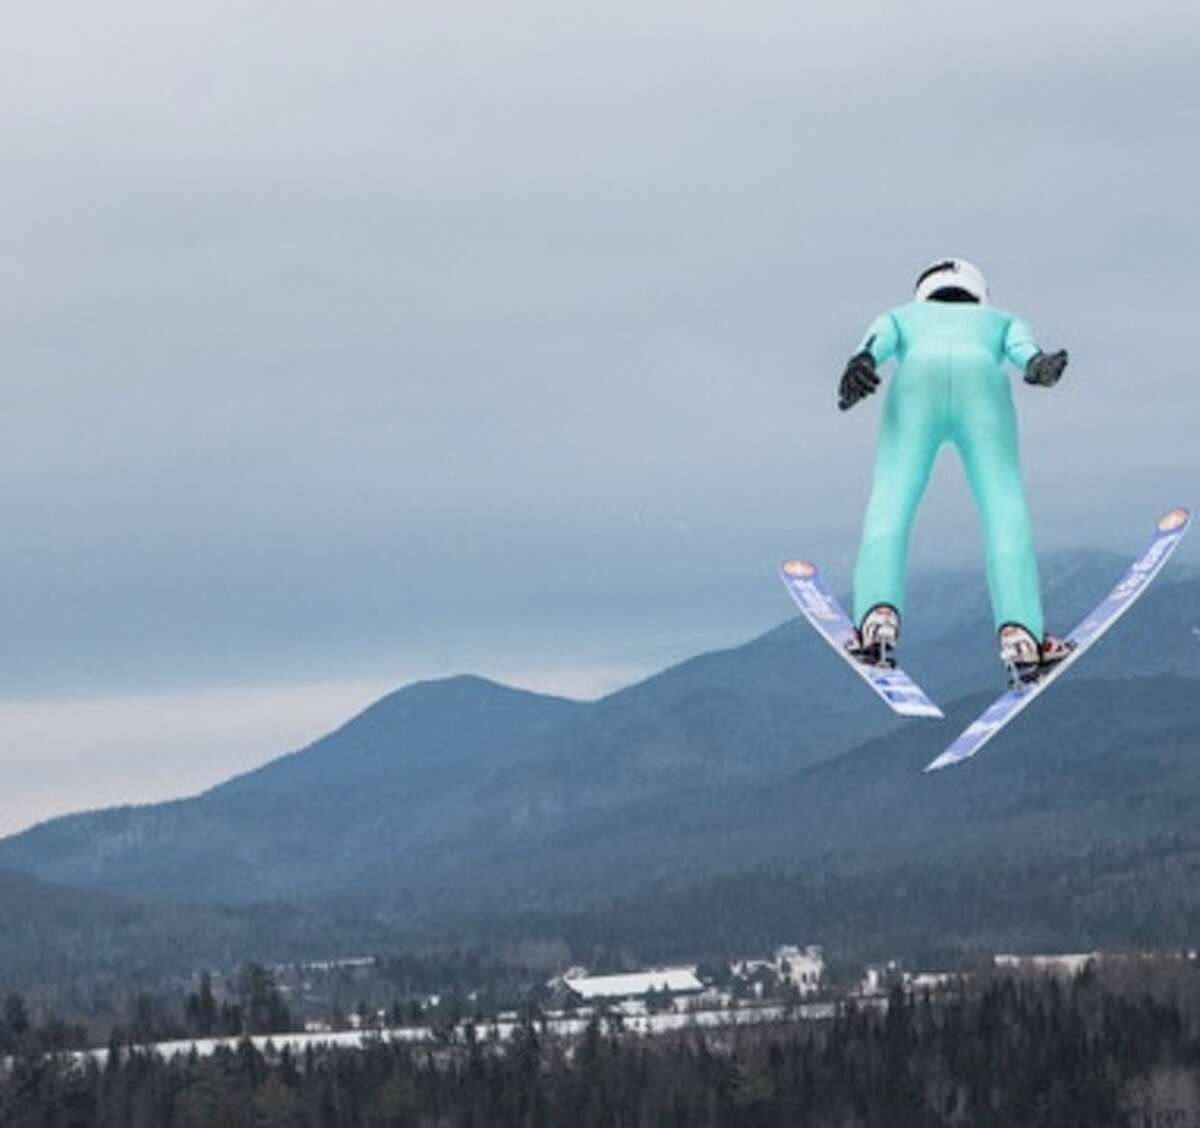 A view of a ski jumper at the Olympic training facilities in Lake Placid.